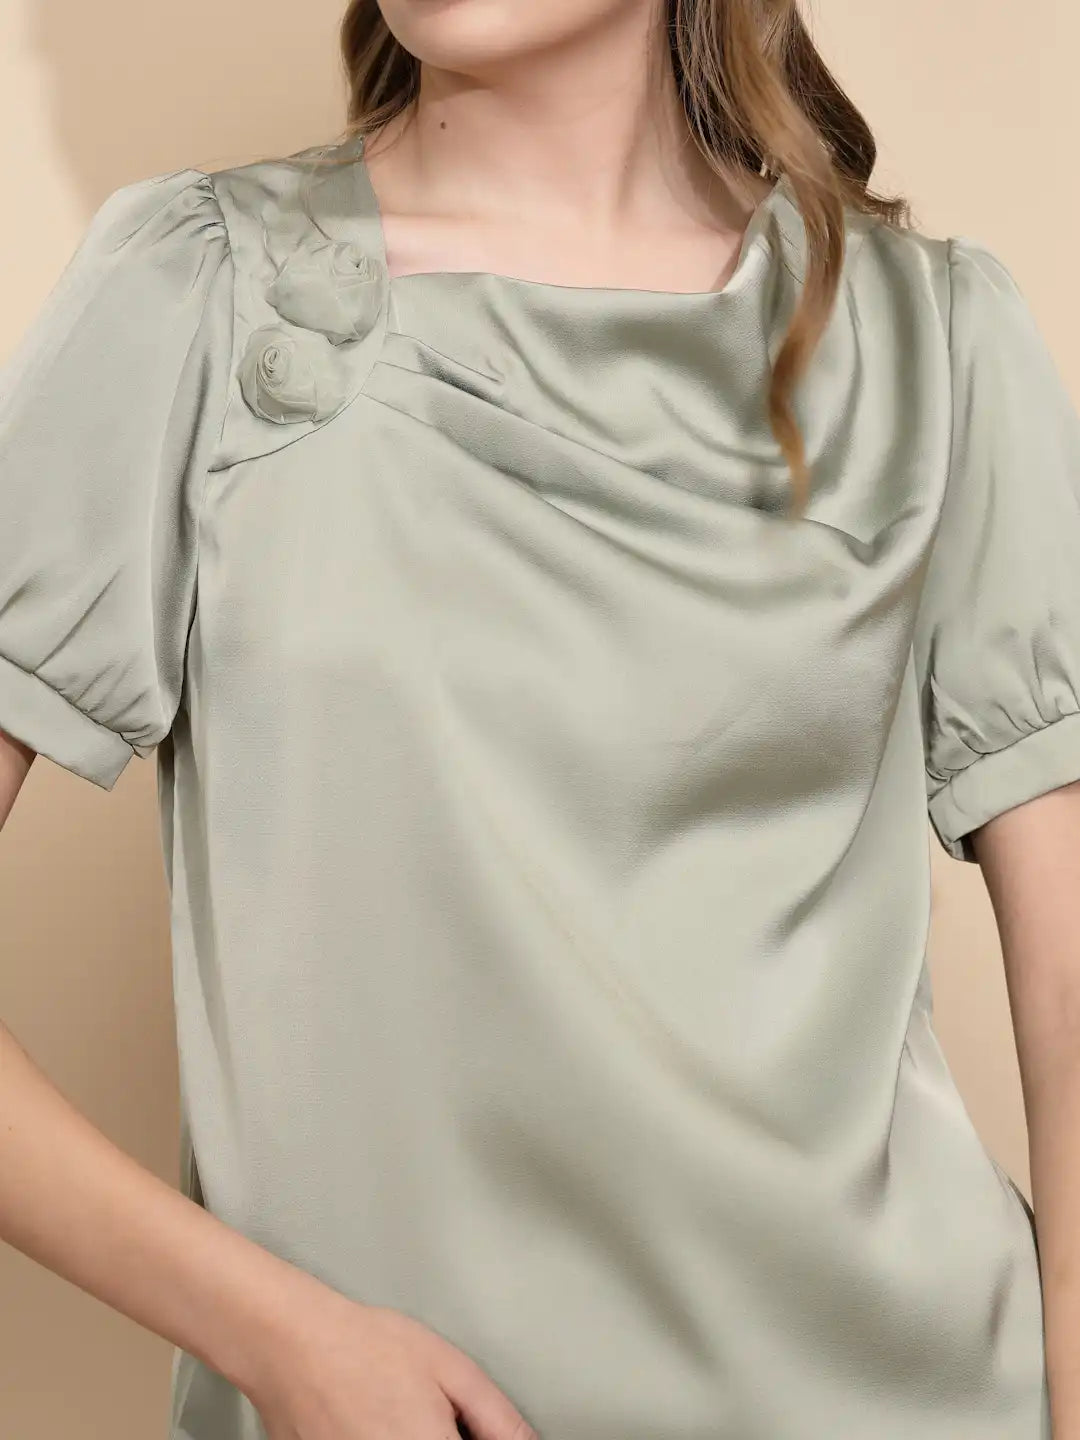 Avocado Polyester Blend Loose Fit Blouse For Women